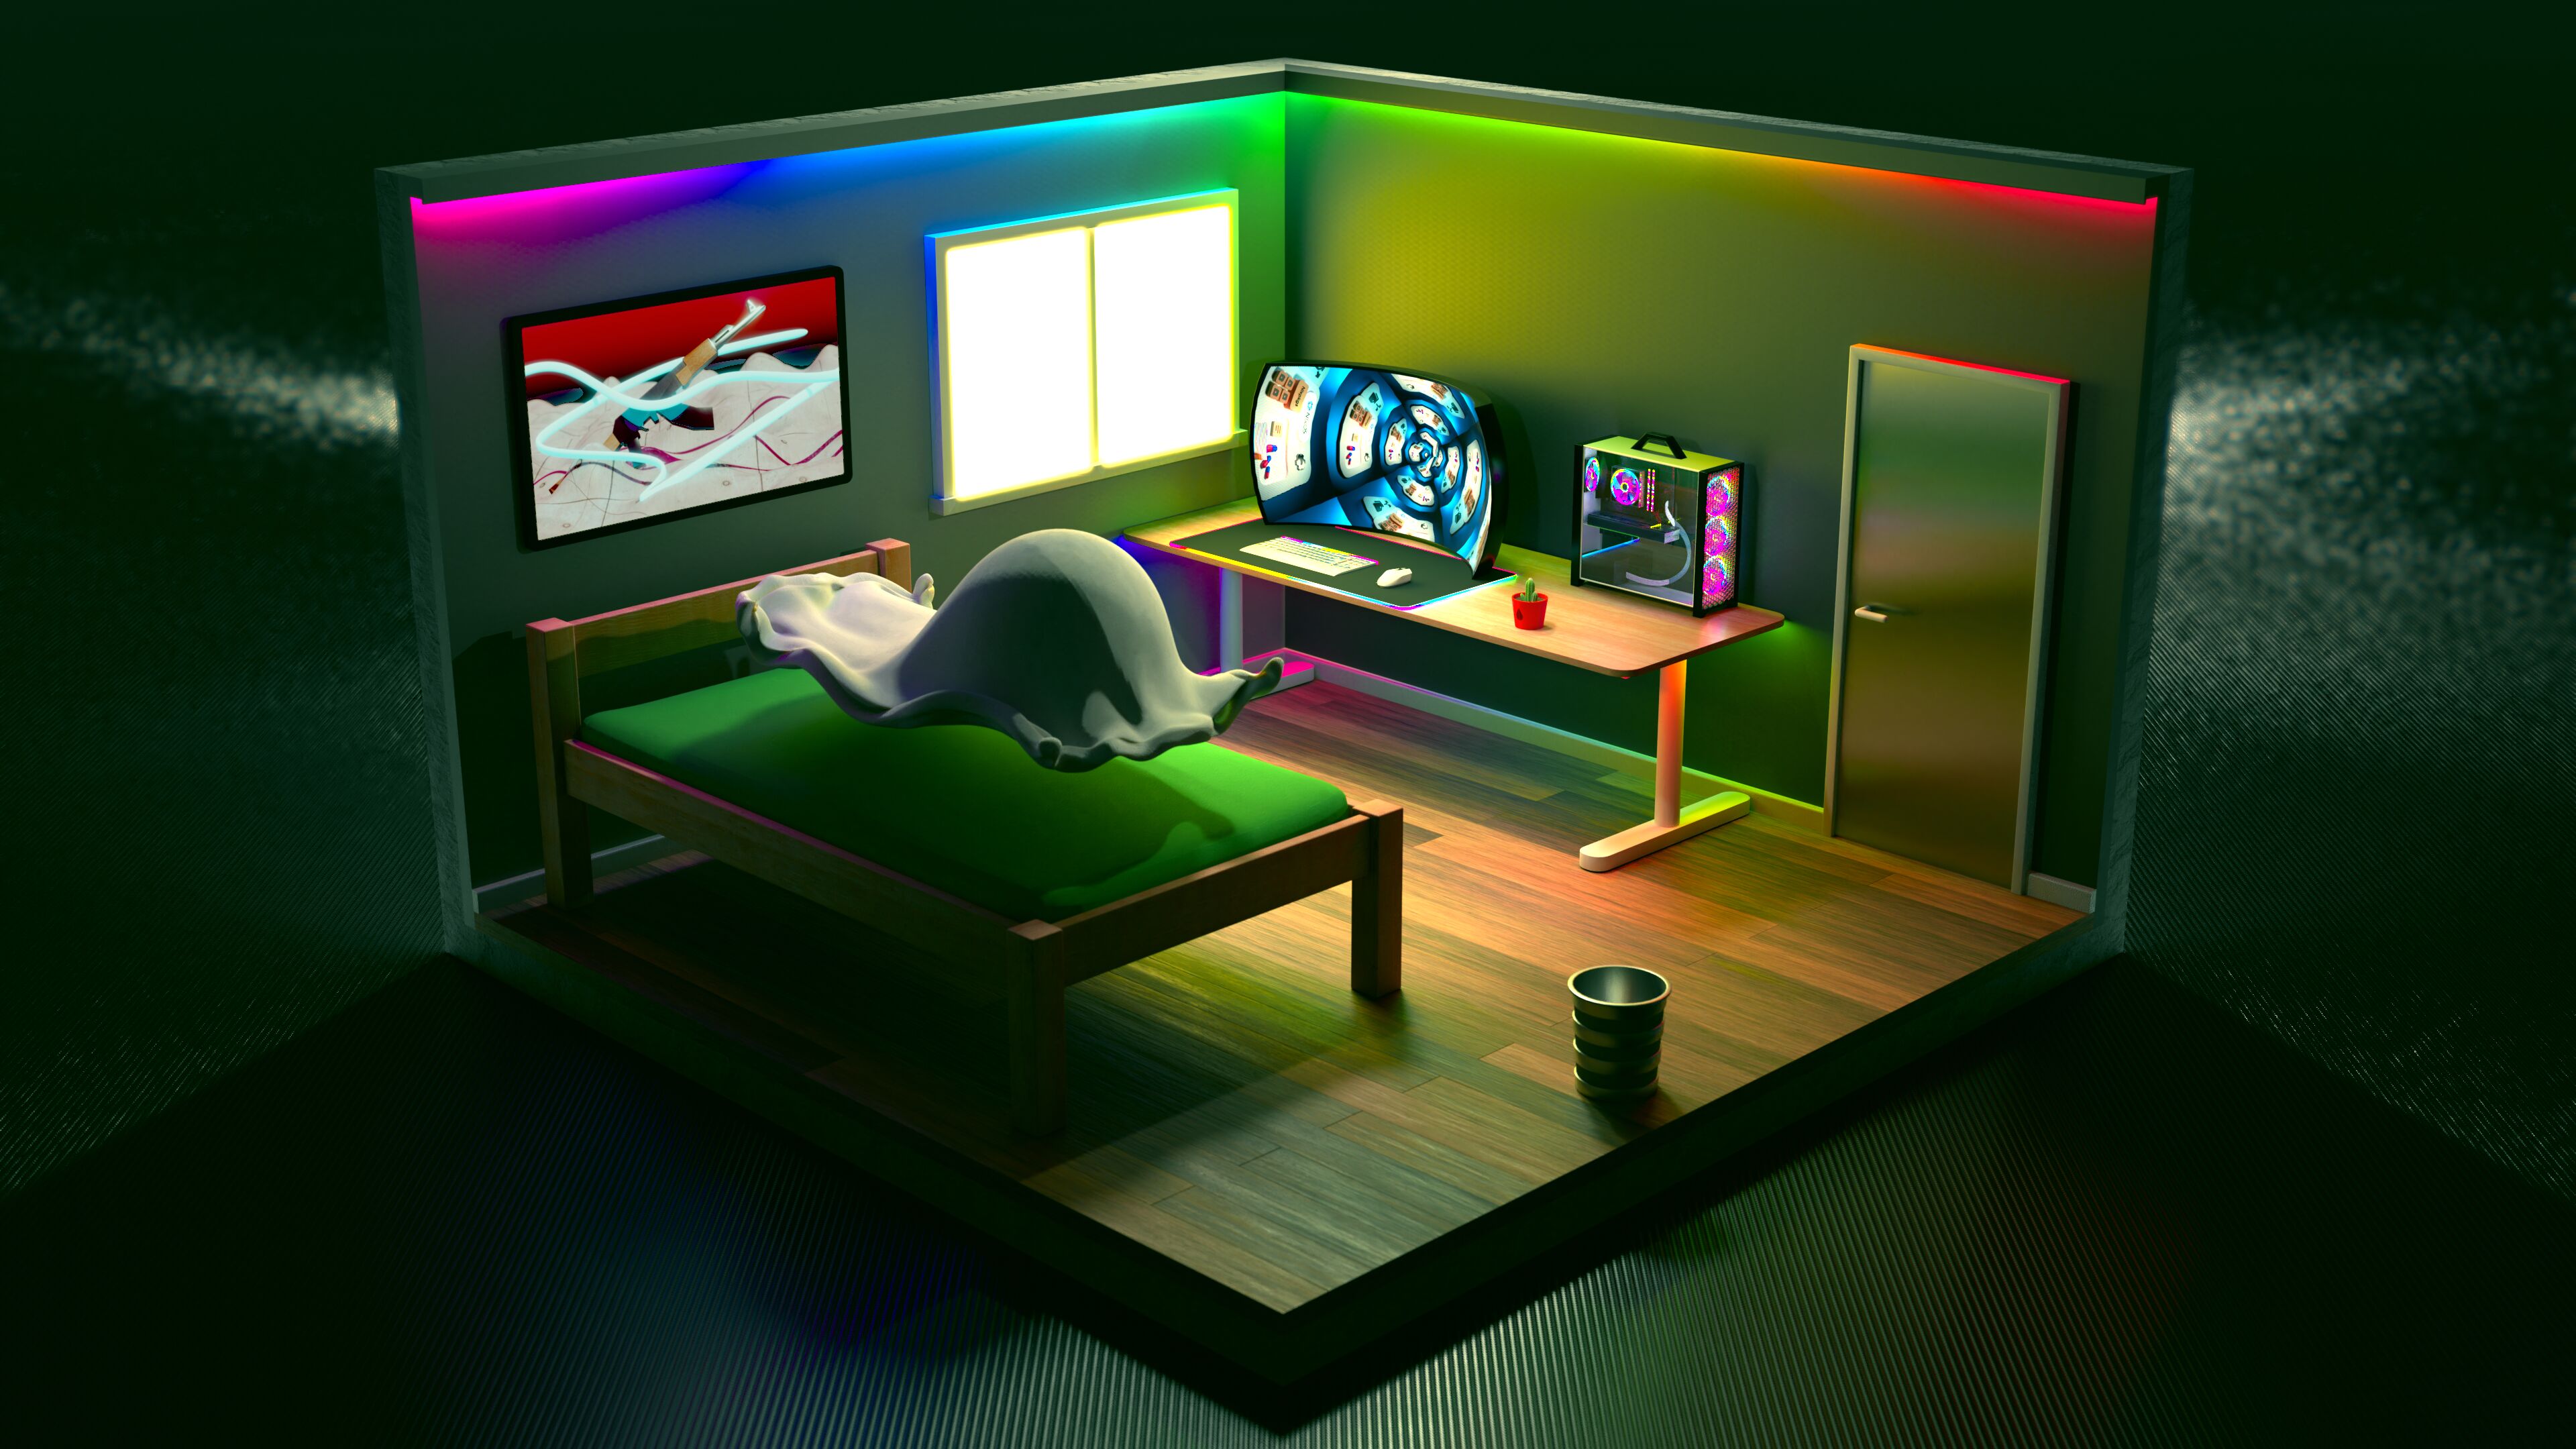 A cutout of a bedroom. It is placed on a carbon fiber floor. The bedroom includes a wooden bed with a green mattress, a metal in, a dark wooden floor, a desk, windows, a door, a monitor with keyboard and mouse and a PC behind a cactus. There are also rainbow (RGB) light a the top of the room. On top of the bed, there is a white blanket floating with a sphere under it. On the wall, the AK47 artwork from the portfolio is framed.